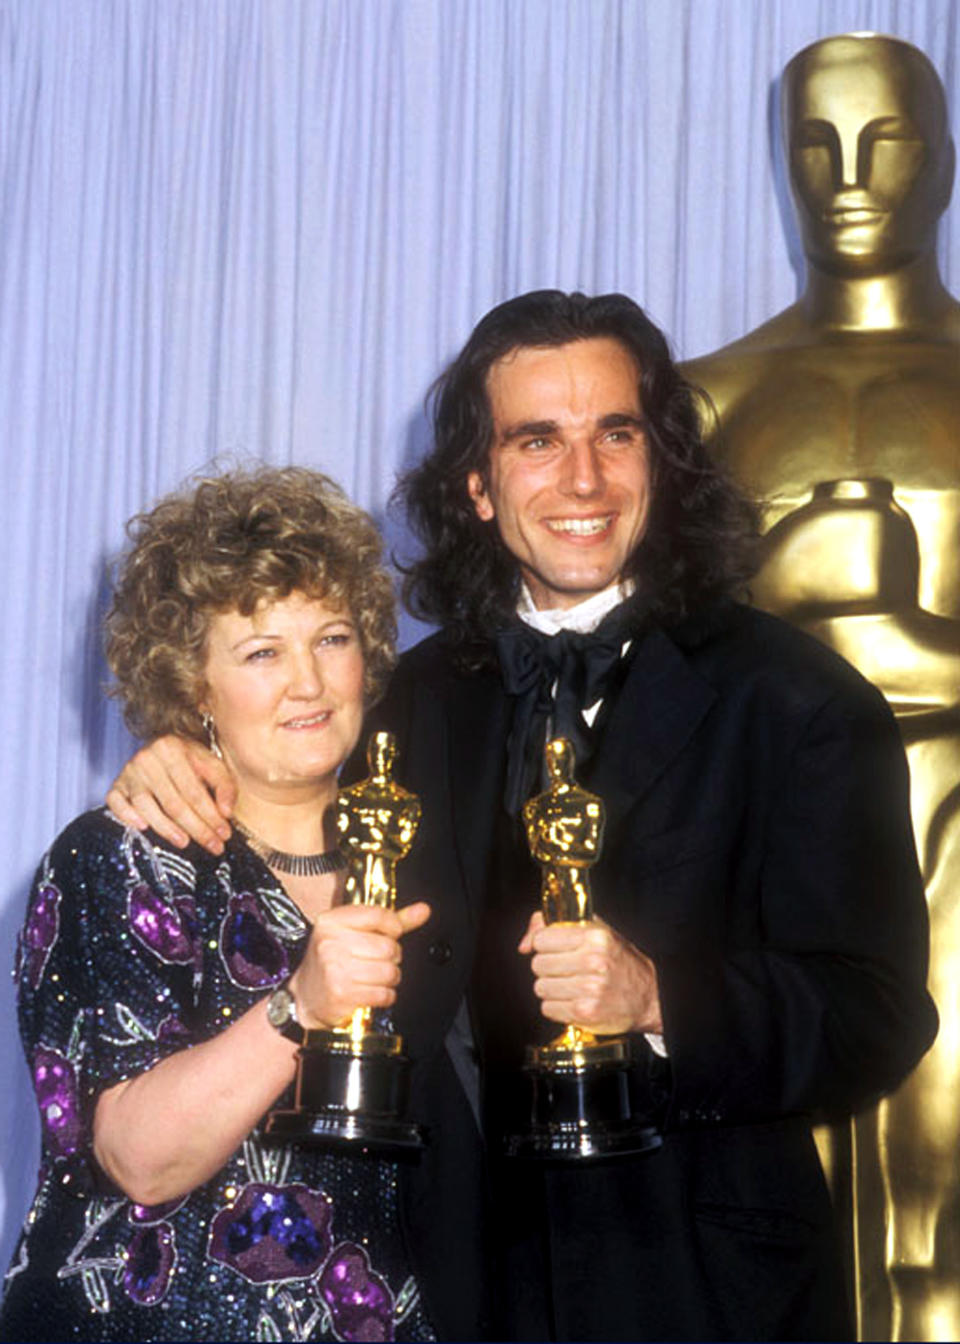 Brenda Fricker and Daniel Day Lewis during 62nd Annual Academy Awards at Music Center in Los Angeles, California, United States. (Photo by Barry King/WireImage)